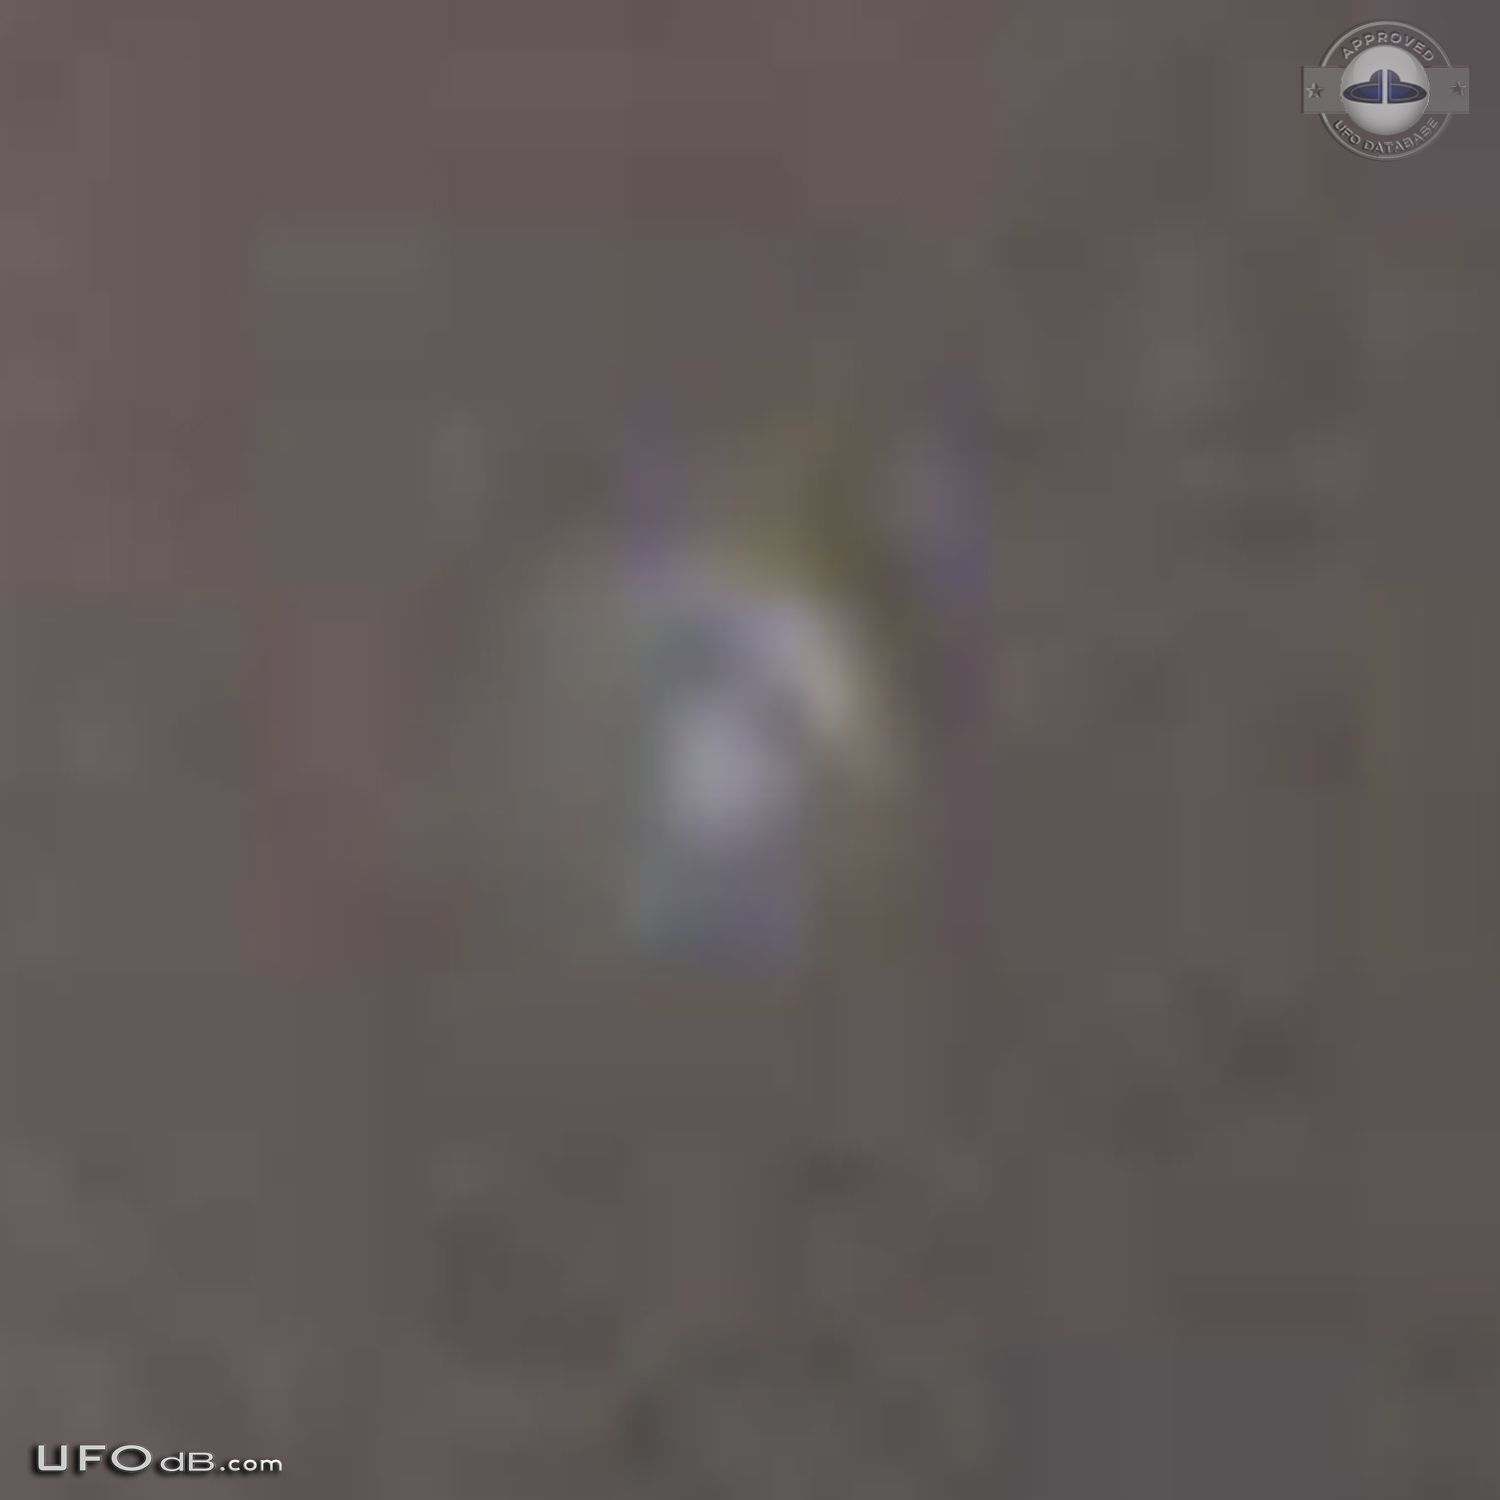 Triangular UFO formation caught on picture in Havana, Cuba in 2005 UFO Picture #442-5